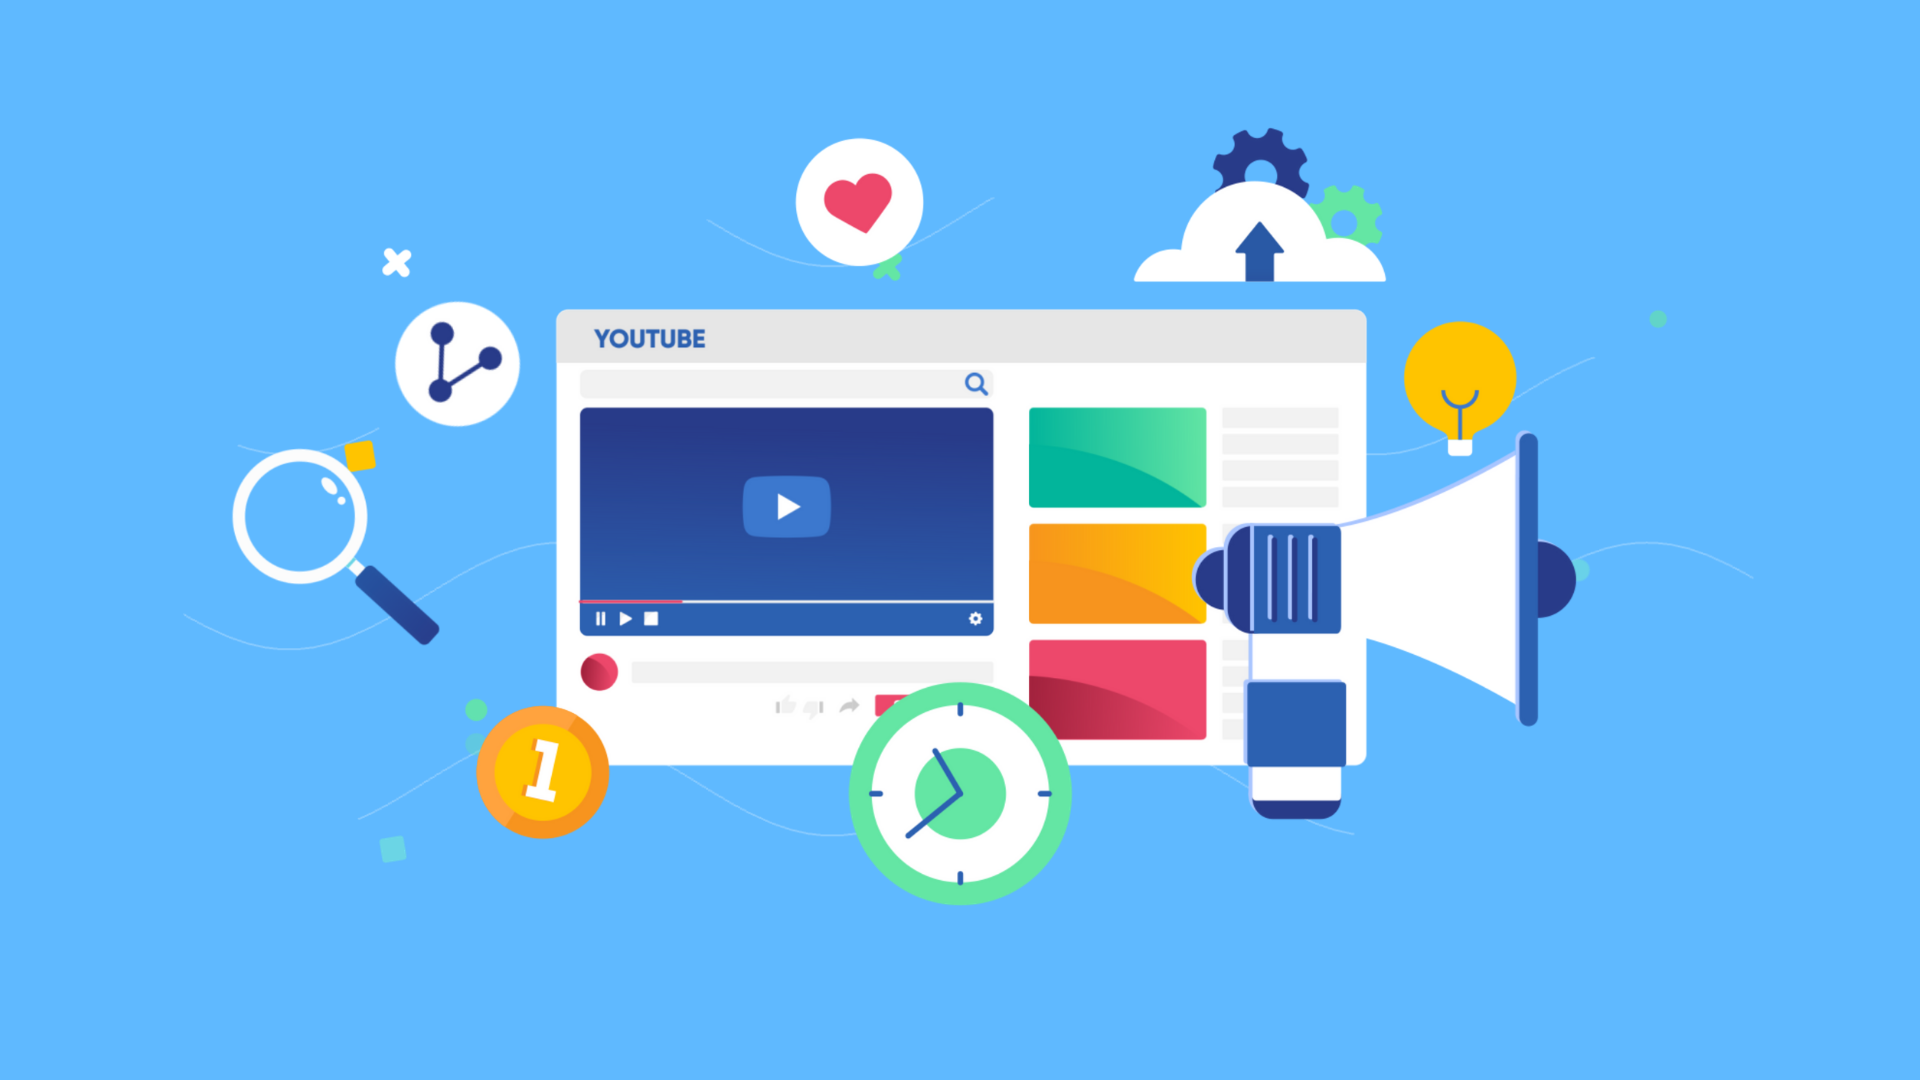 YouTube best practices for traffic and ROI - vector image